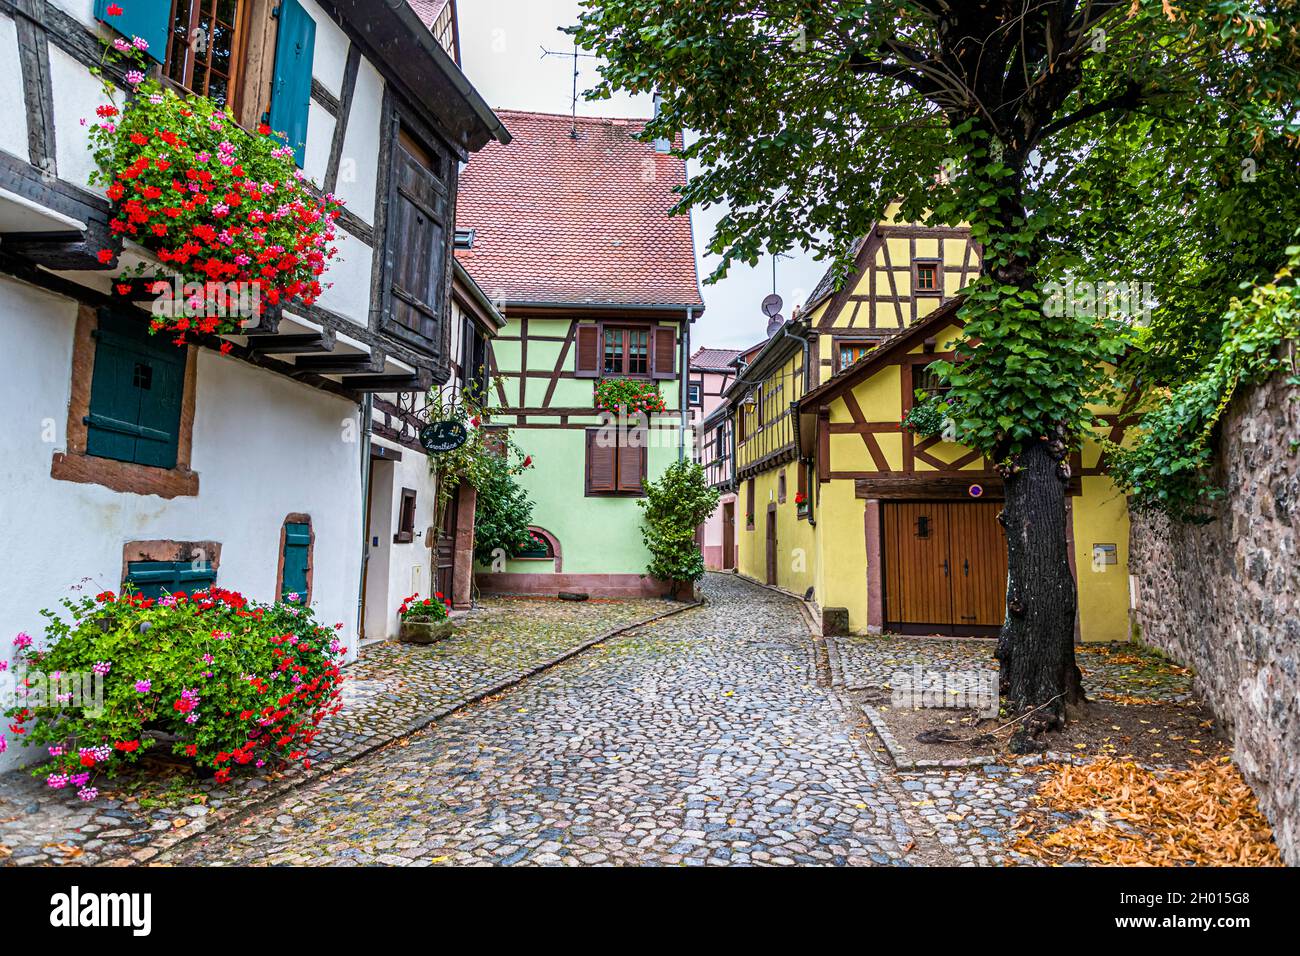 Street view with half-timbered houses in Kaysersberg, France Stock Photo